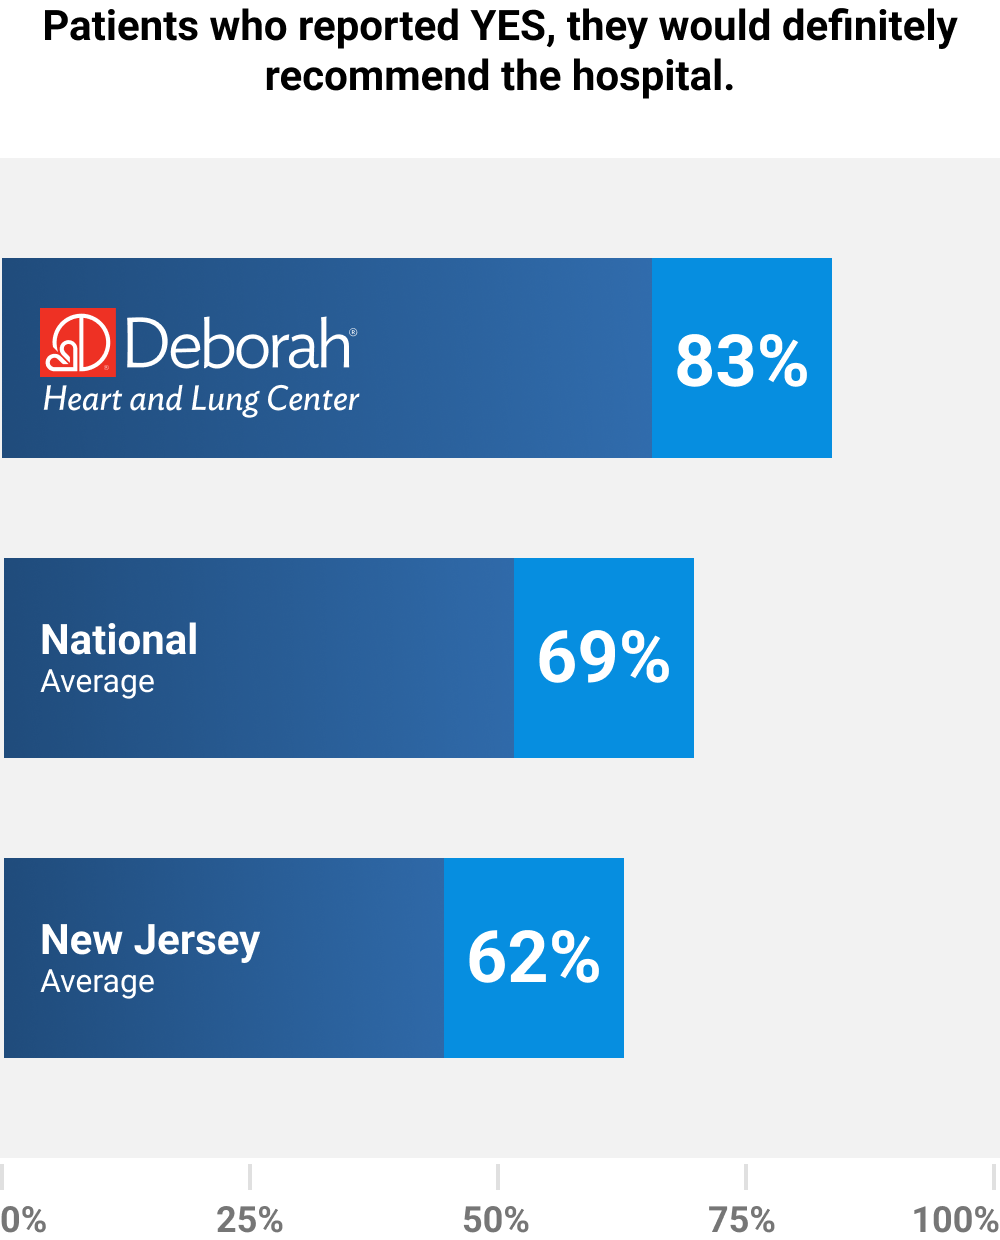 Patients who reported YES, they would definitely recommend the hospital. Deborah: 83%, National Average: 69%, New Jersey Average: 62%